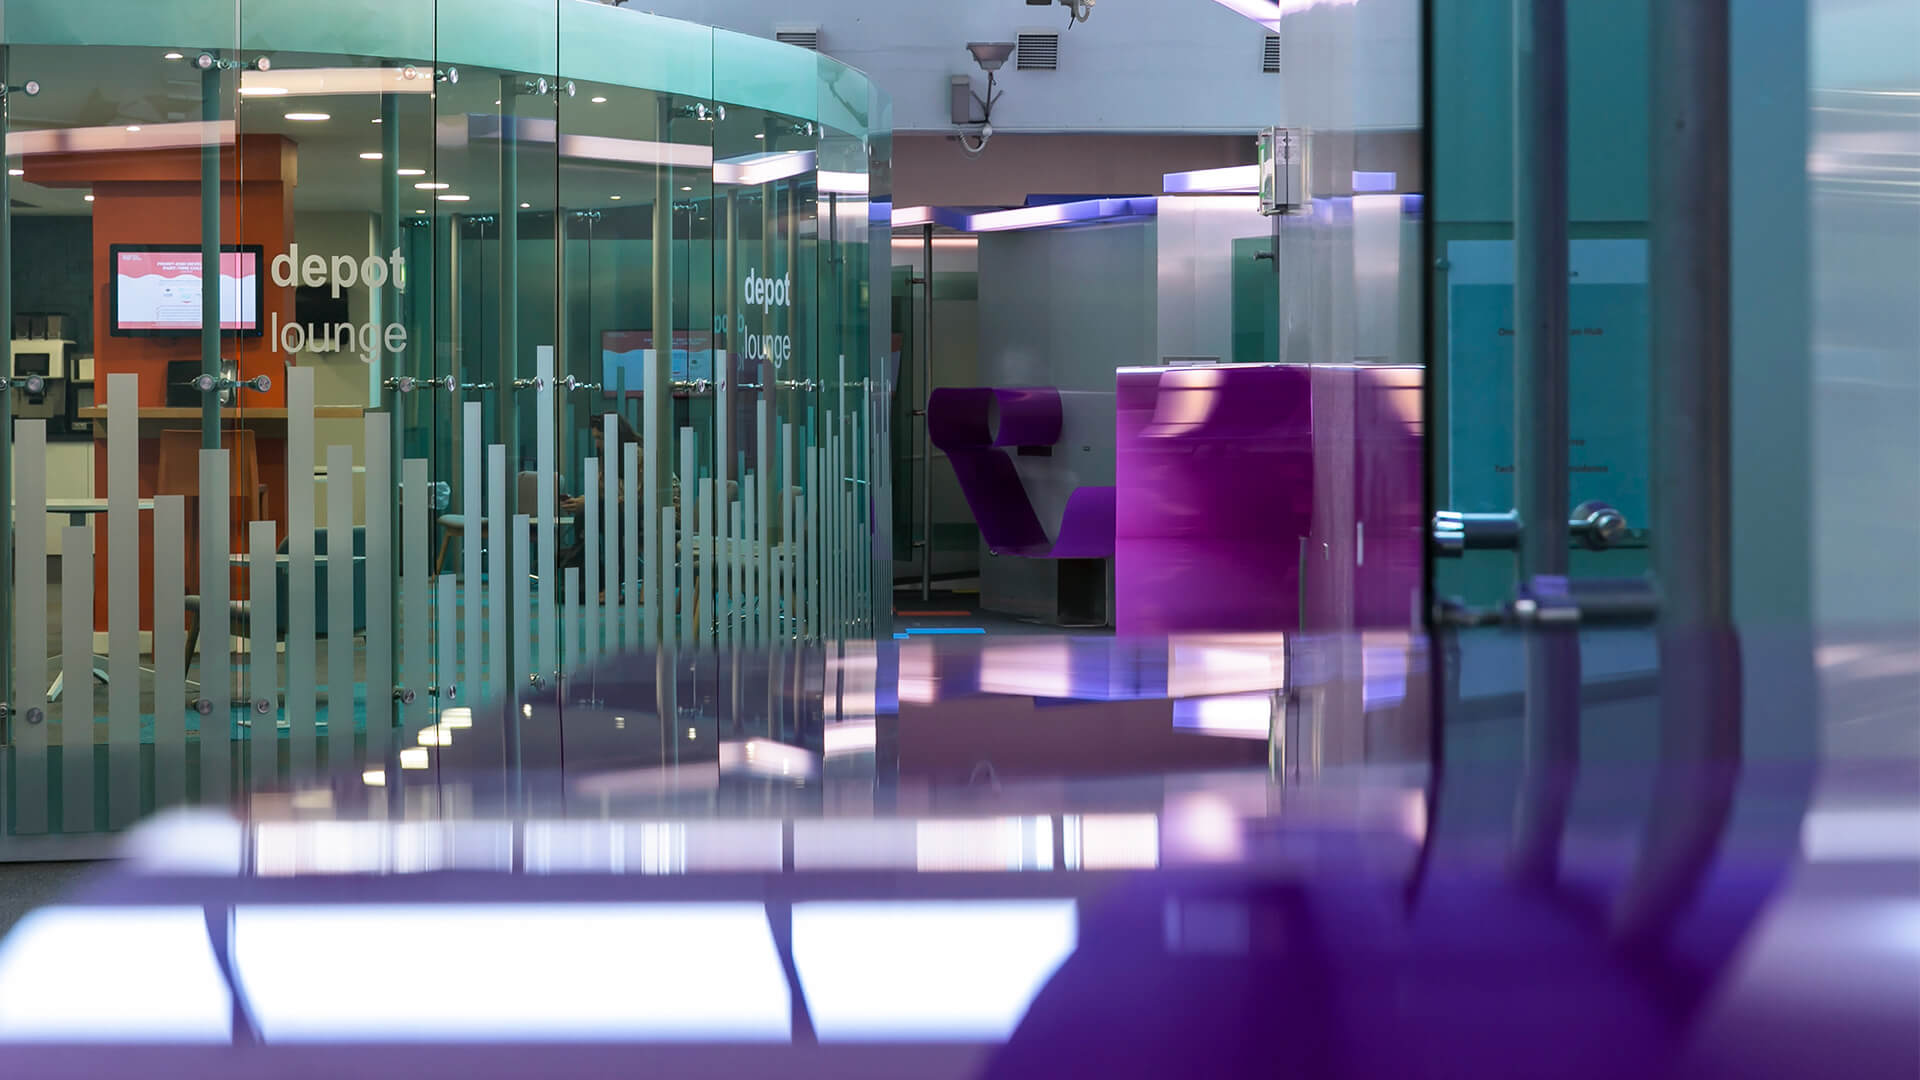 Clean lines, glass and bright colours fill the Digital Depot building